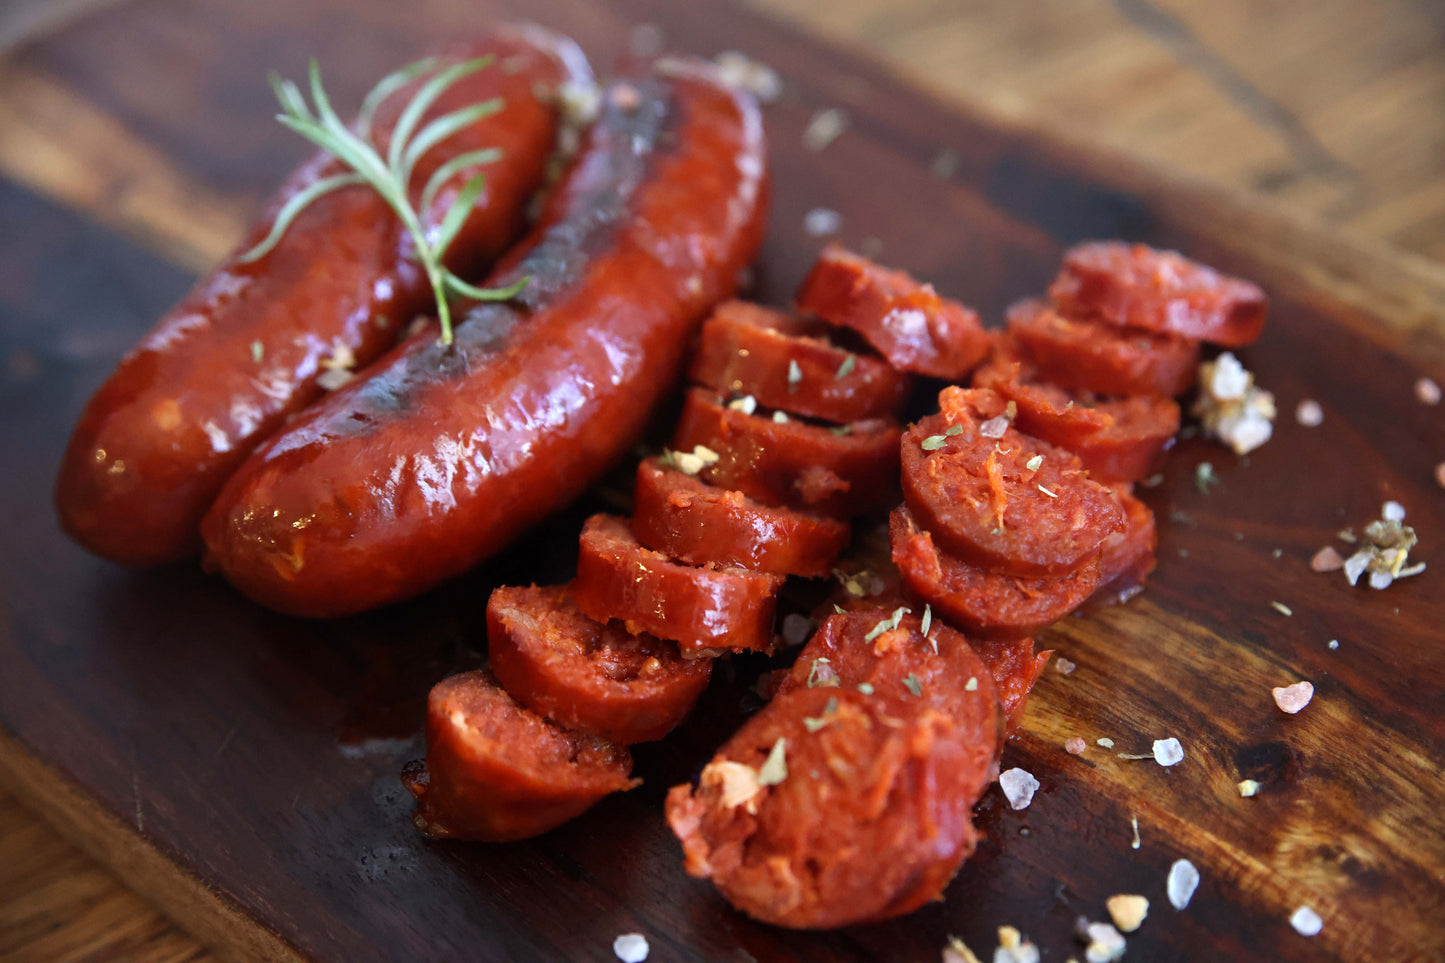 HOT Artisan Traditional Chorizo 4 piece pack random weight approx 400g packet. Regular price $10.00 AUD [You are guaranteed to receive at least 390g of product, equivalent price of $25.64 per kg.]